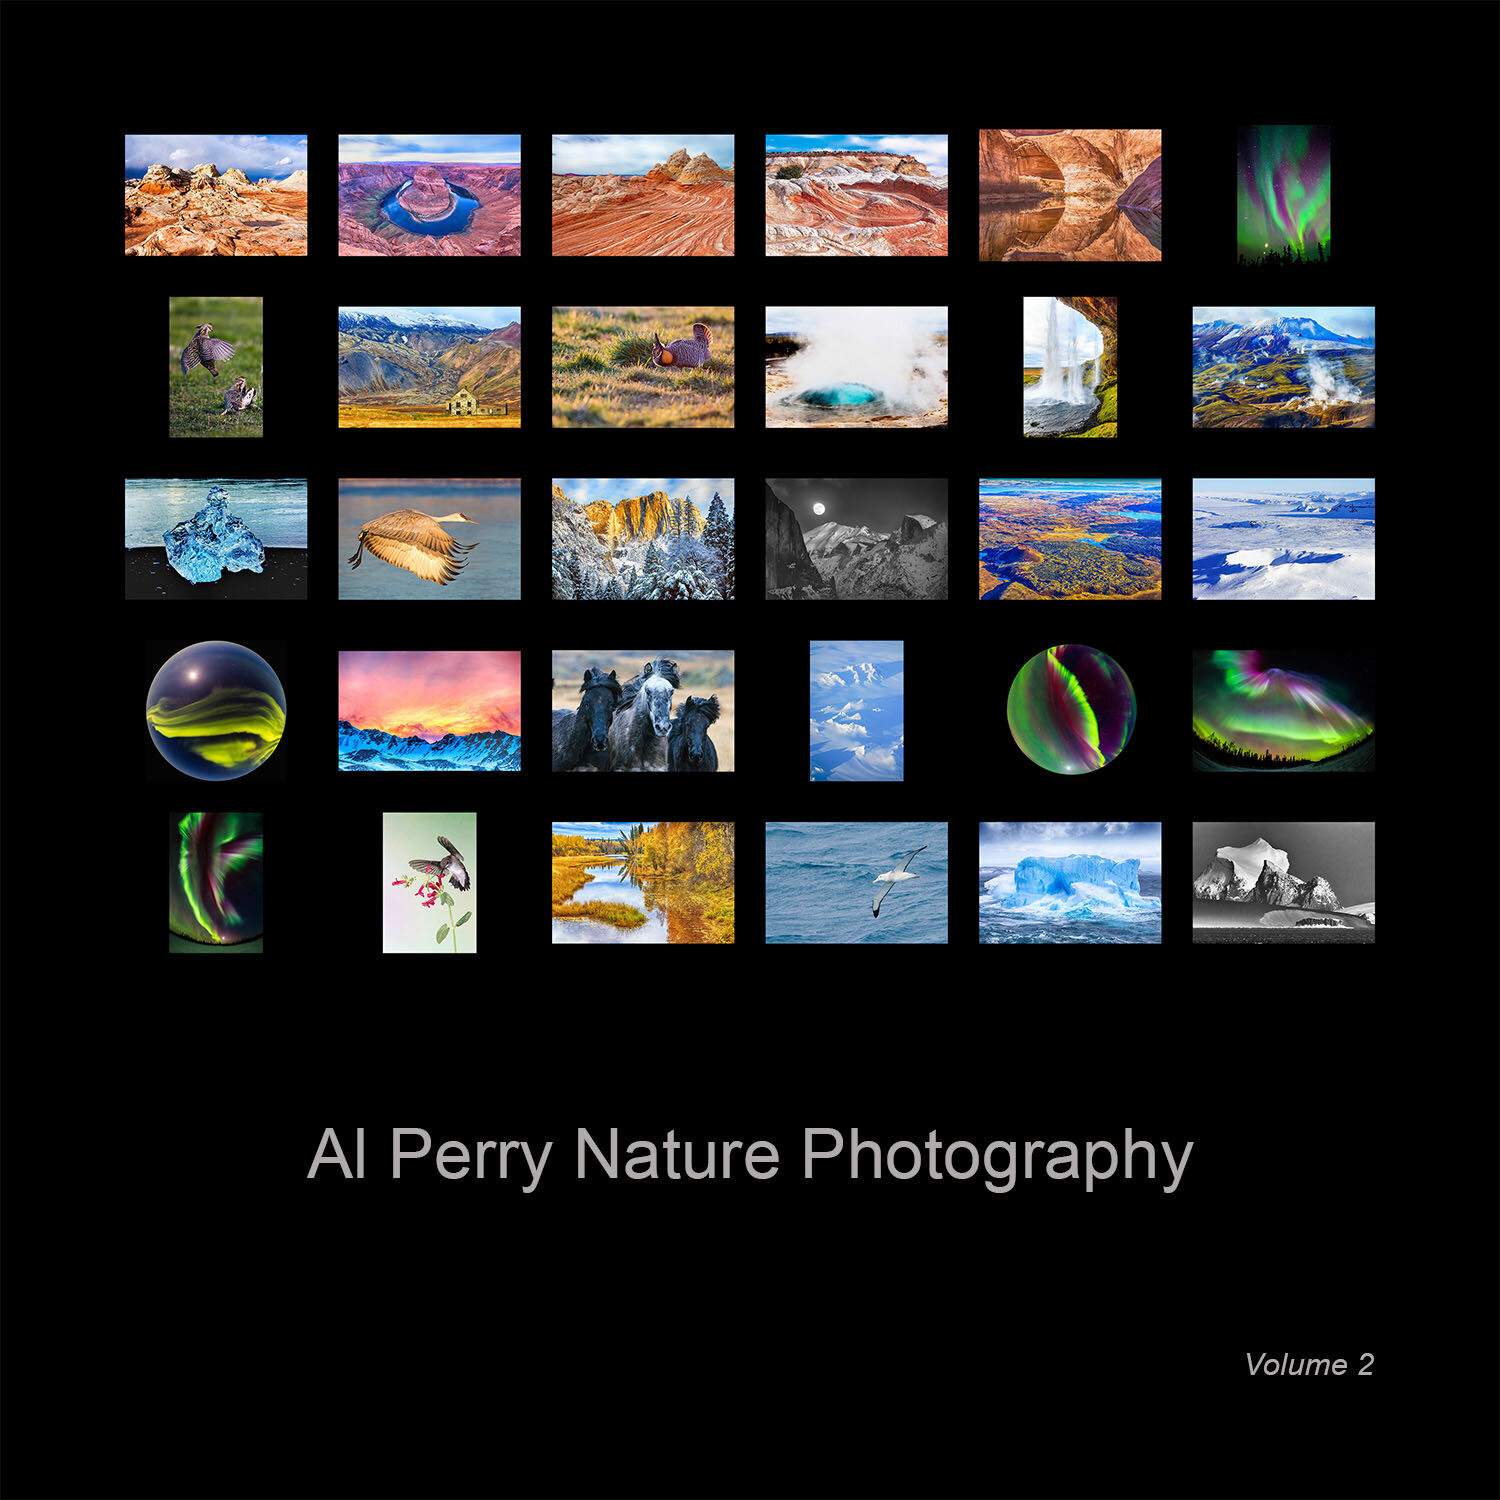 Al Perry Nature Photography Volume 2